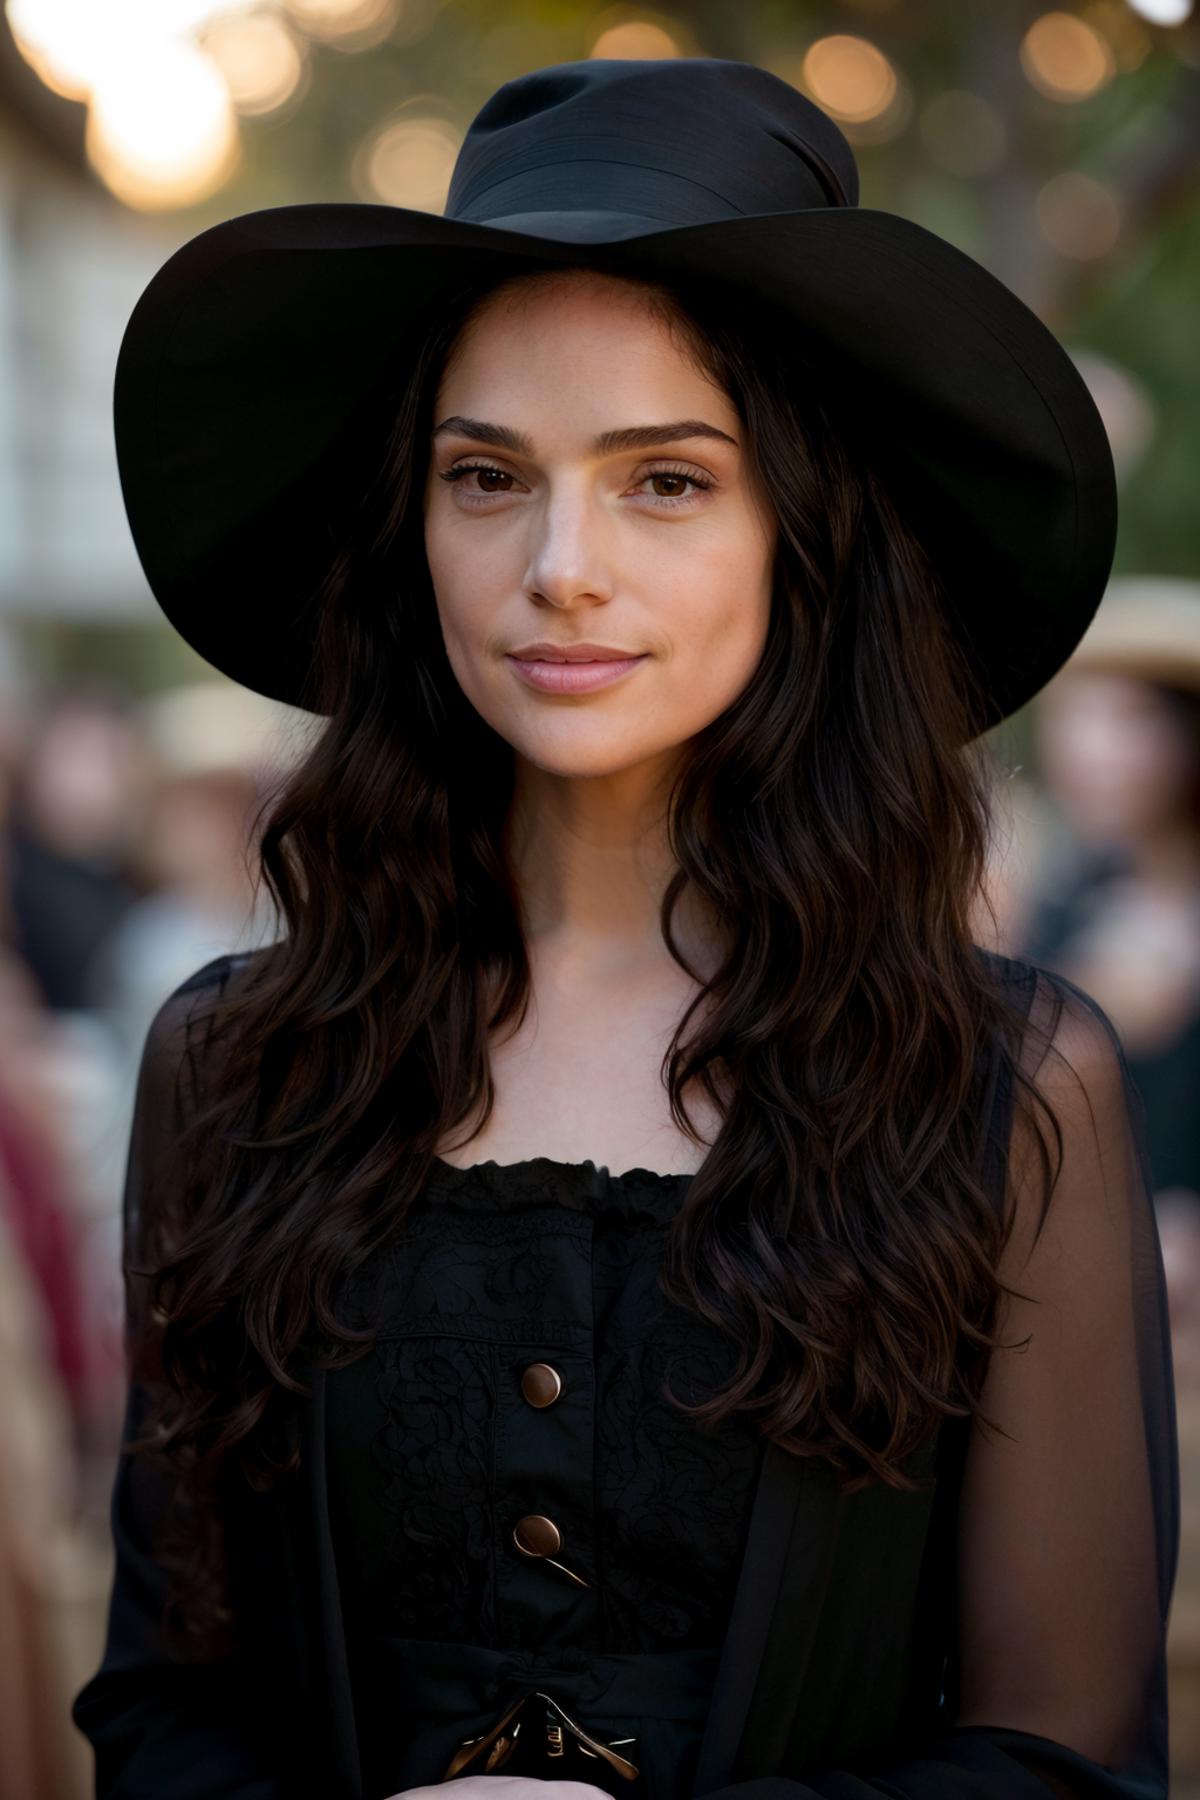 Janet Montgomery image by damocles_aaa